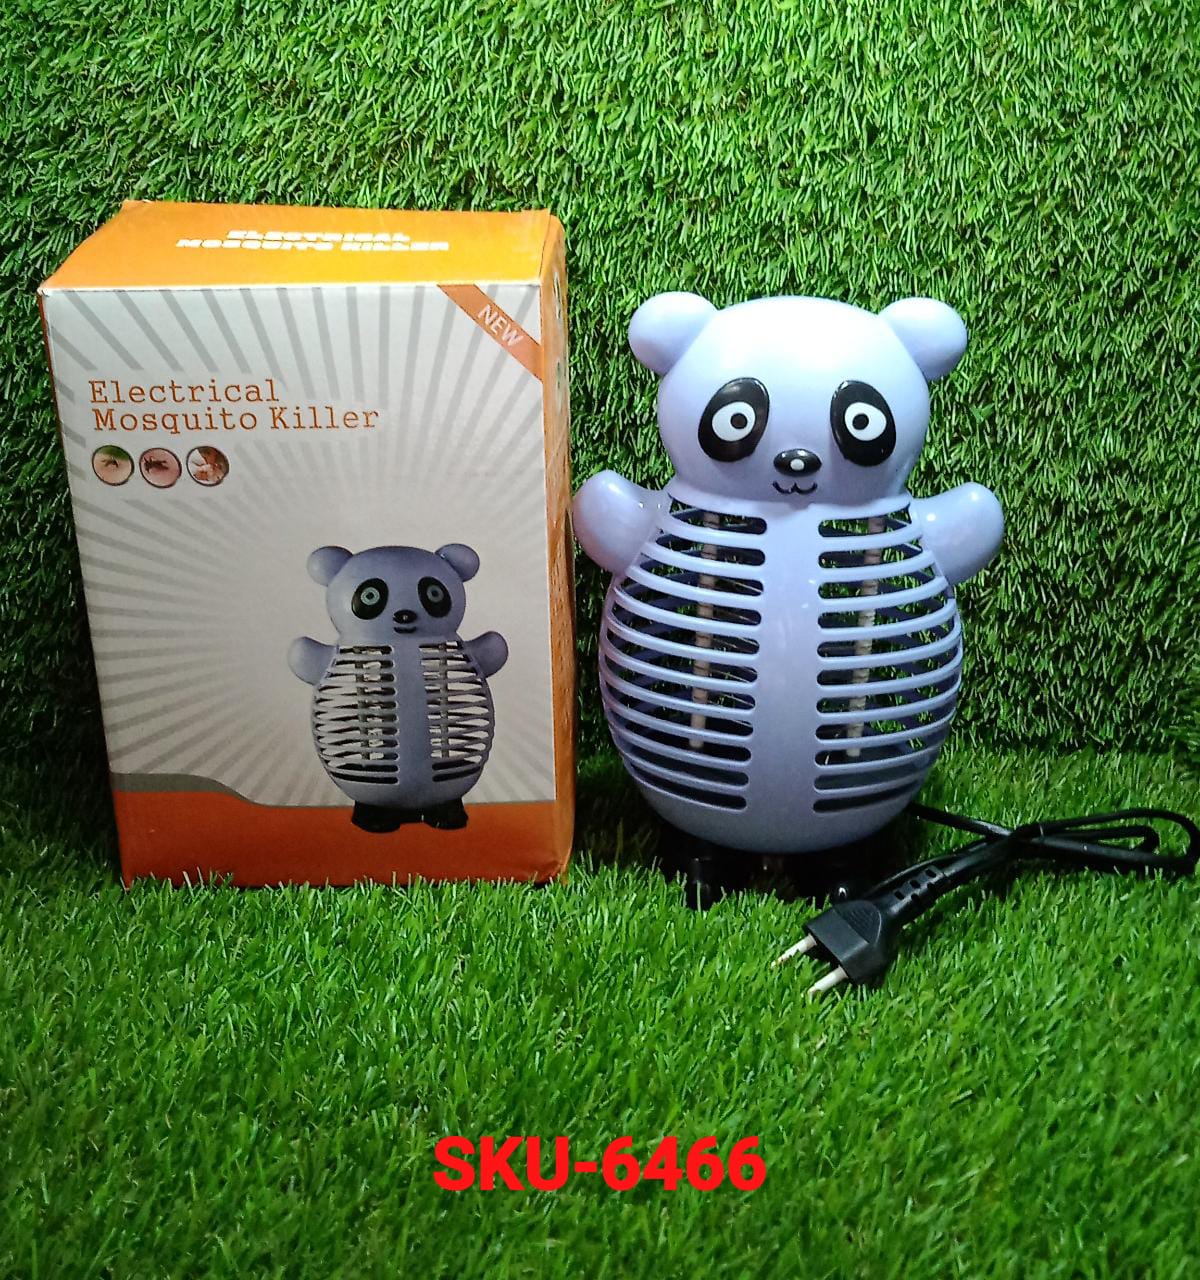 6466 Electronic Cartoon Led Mosquito Killer | Lamps Super Trap Machine For Home Insect Killer | Bug Zapper | USB Powered Machine Eco-Friendly Baby Mosquito Repellent Lamp |Jali Mosquito.